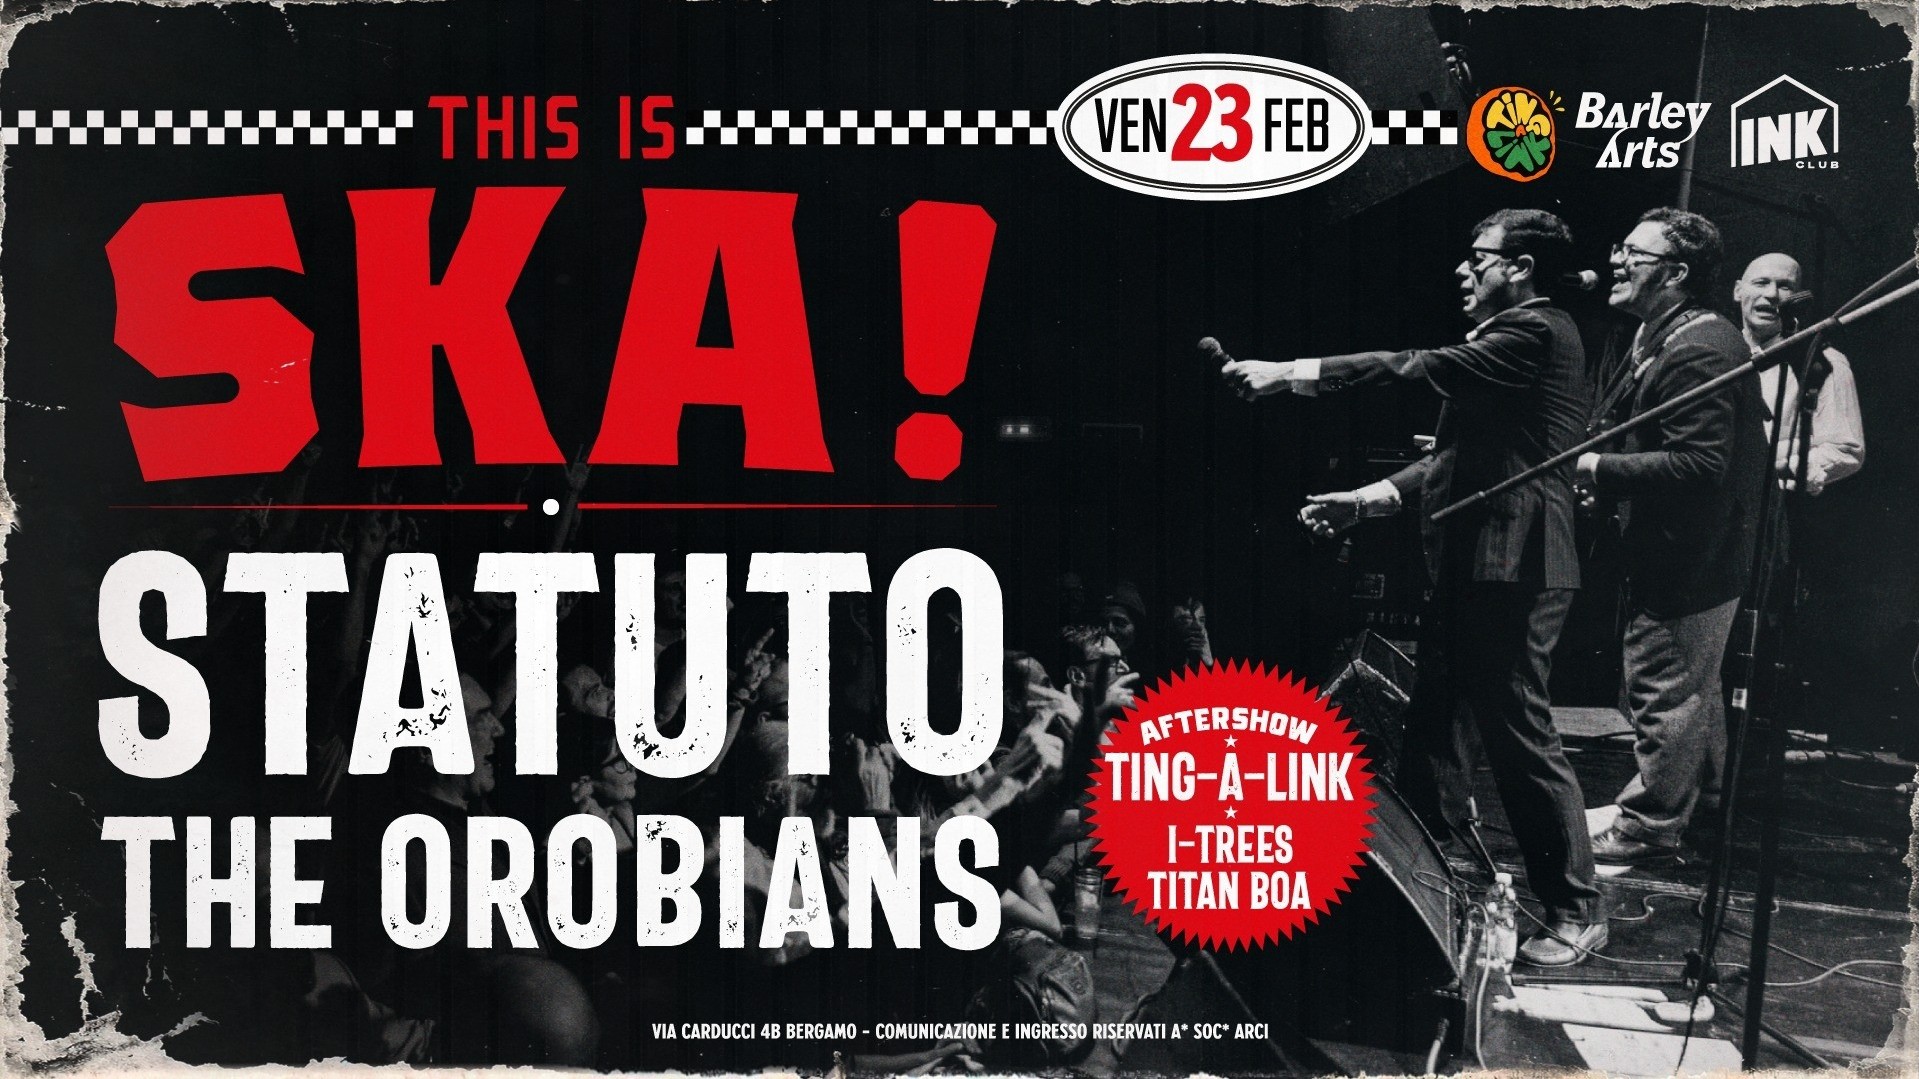 This is ska! Statuto - The Orobians - Ting-a-link